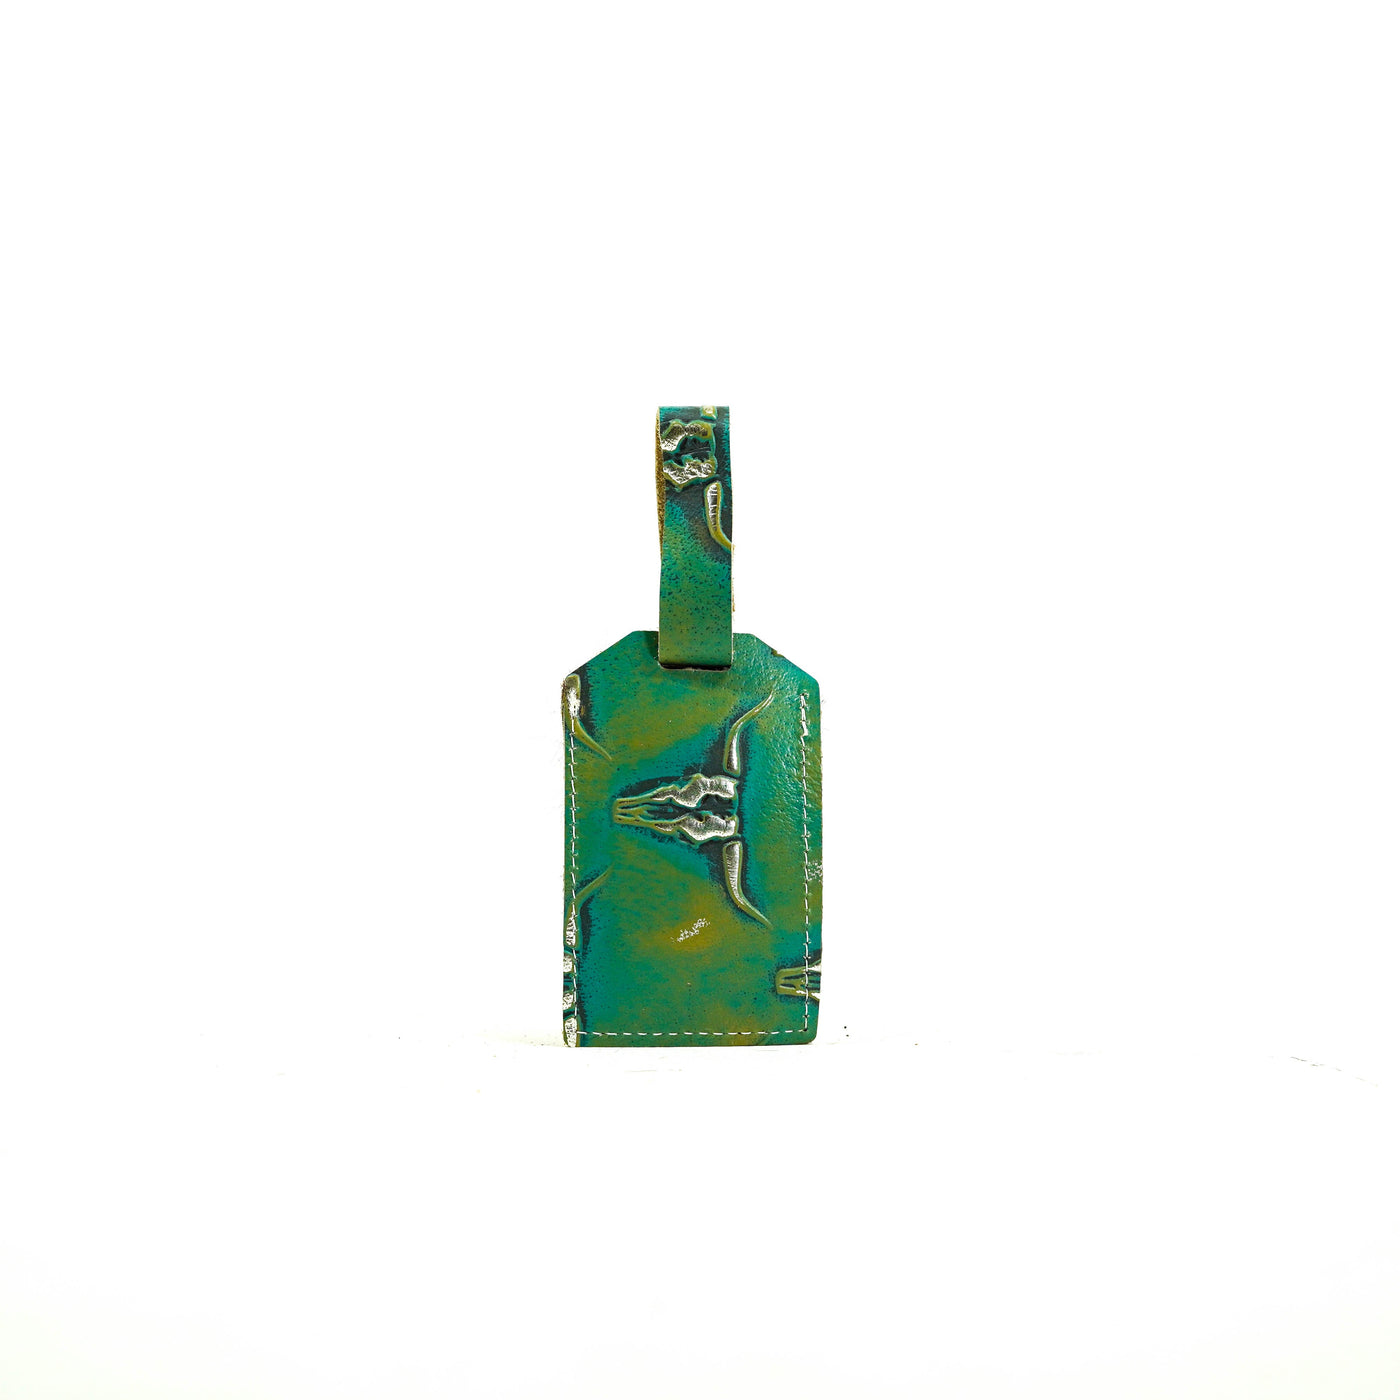 Luggage Tag - Tricolor w/ Margarita Skulls-Luggage Tag-Western-Cowhide-Bags-Handmade-Products-Gifts-Dancing Cactus Designs